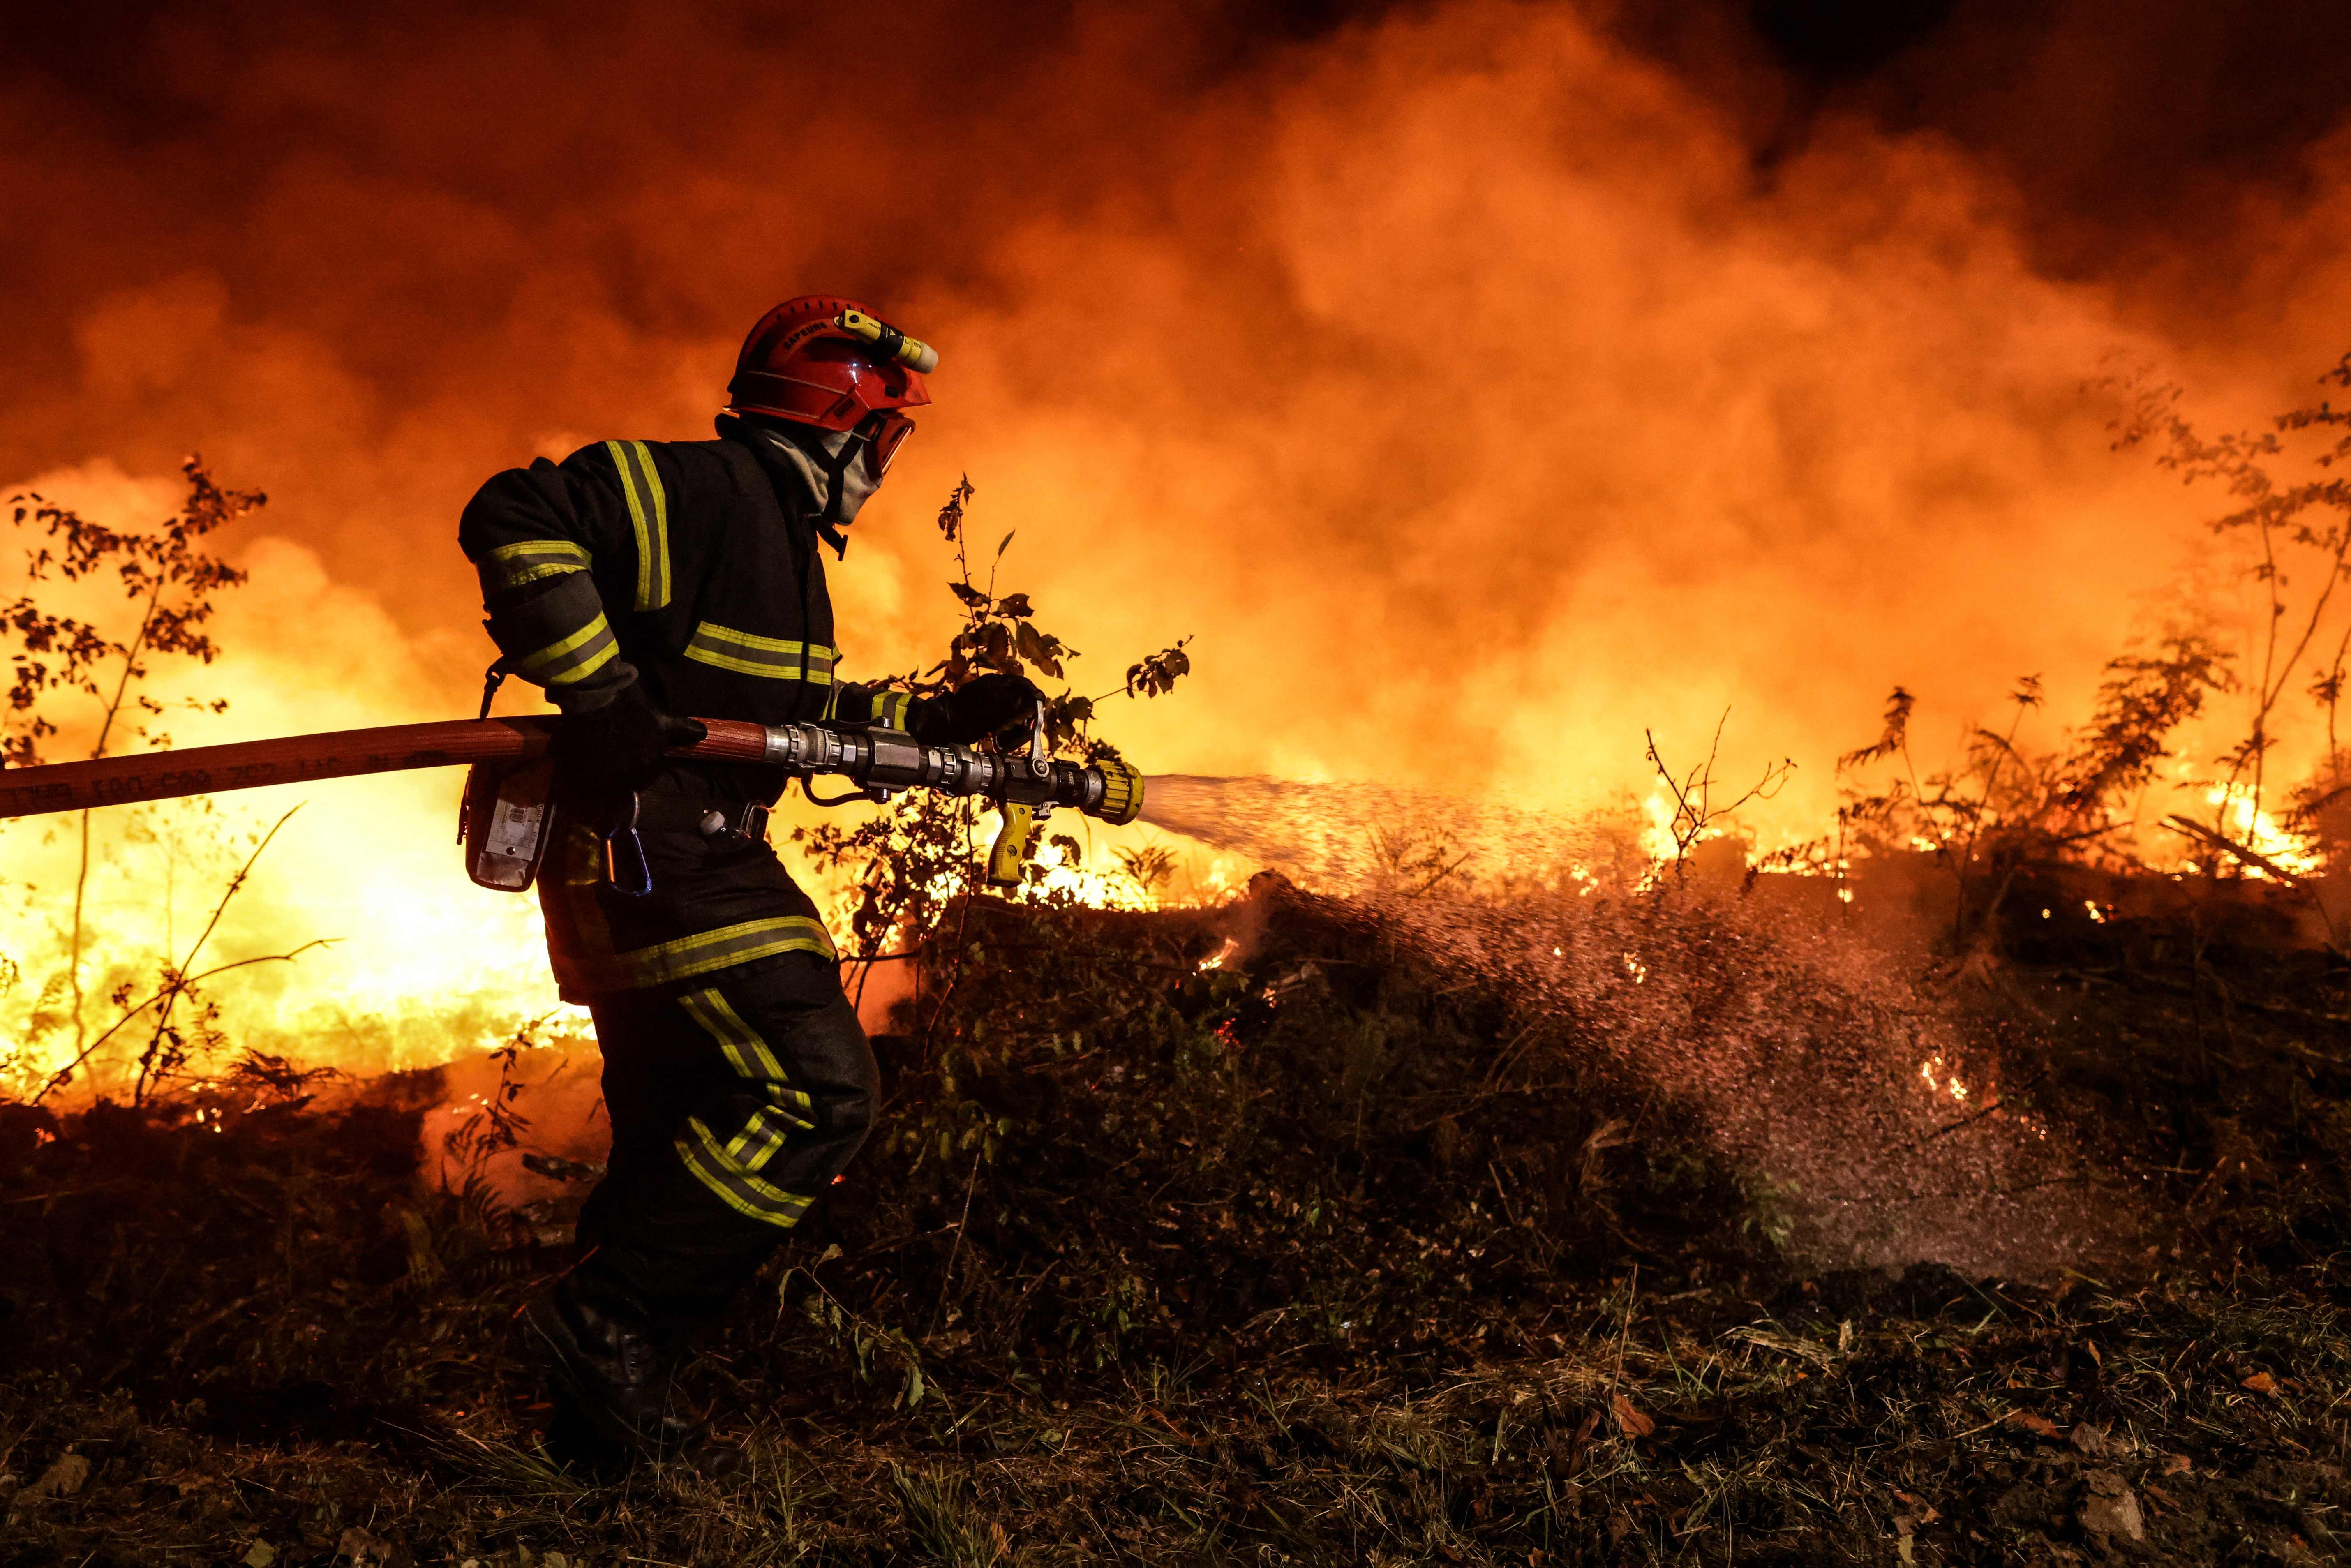 Tens of thousands of people have been evacuated from their homes after wildfires raged across Europe